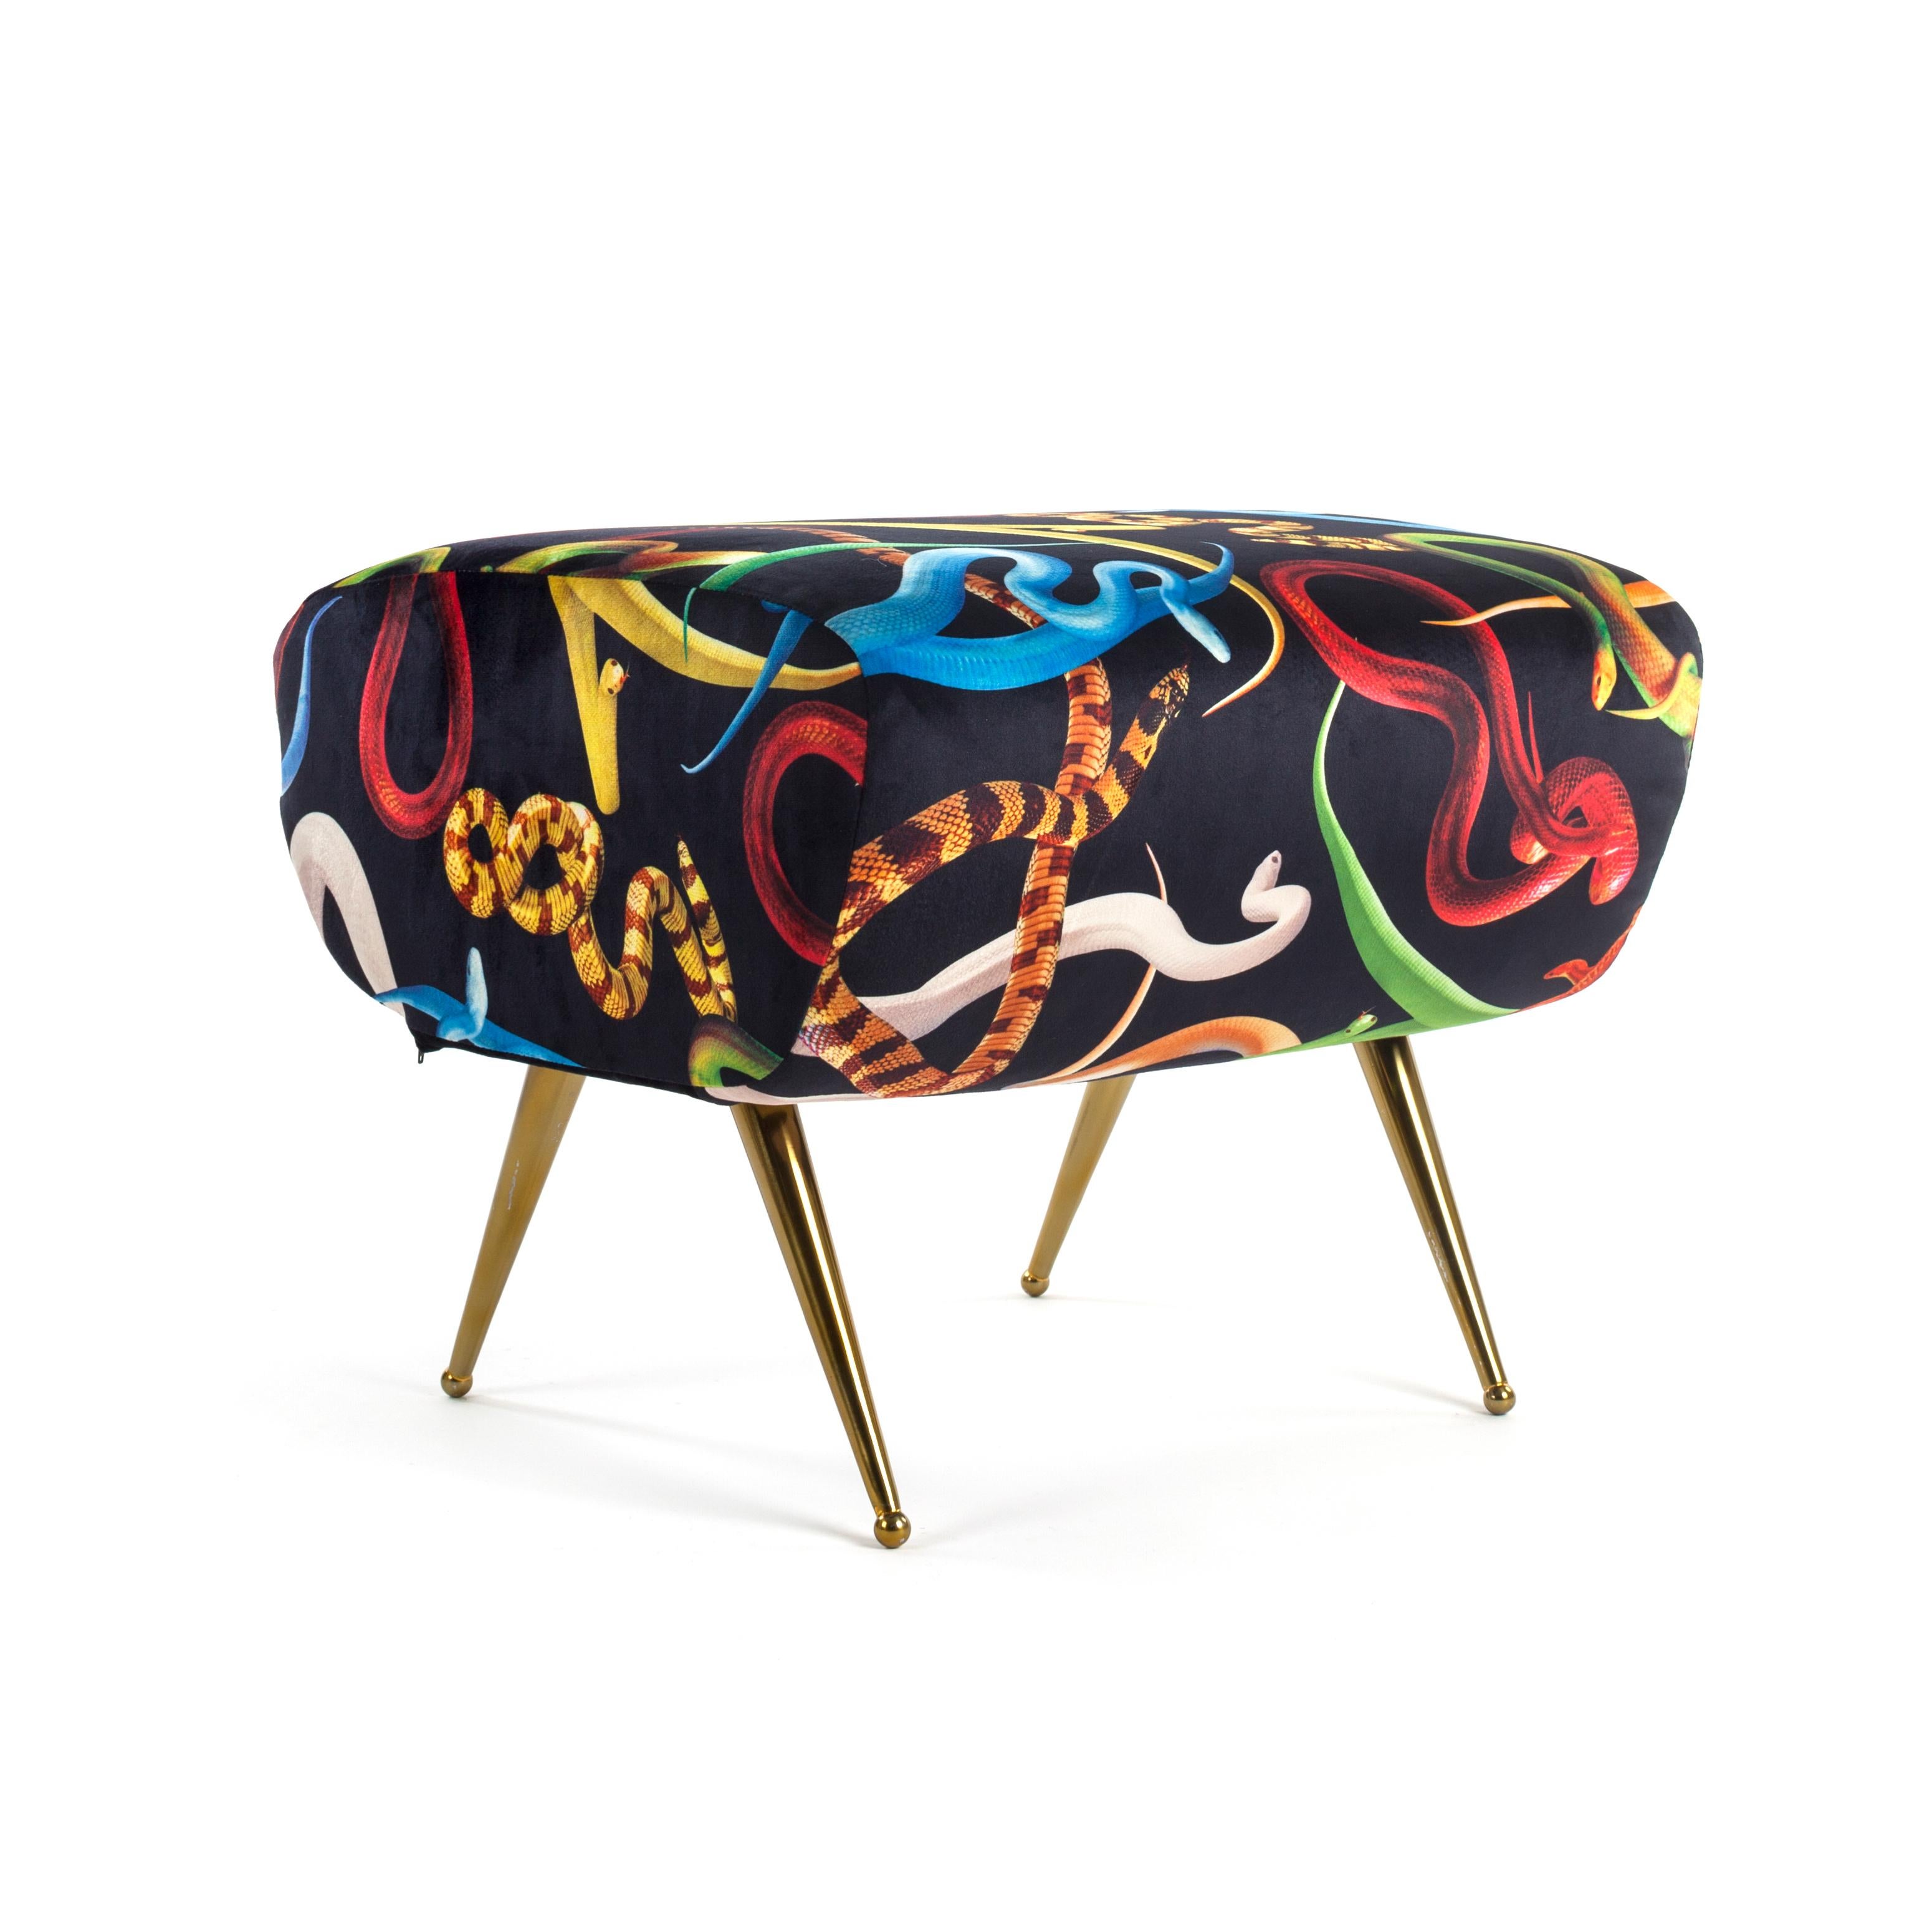 Pouf by Toiletpaper.

- Size: cm 51 × 46, H 42
- Material: Fabrics in polyester, frame in wood with polyurethane padding, metal.
 